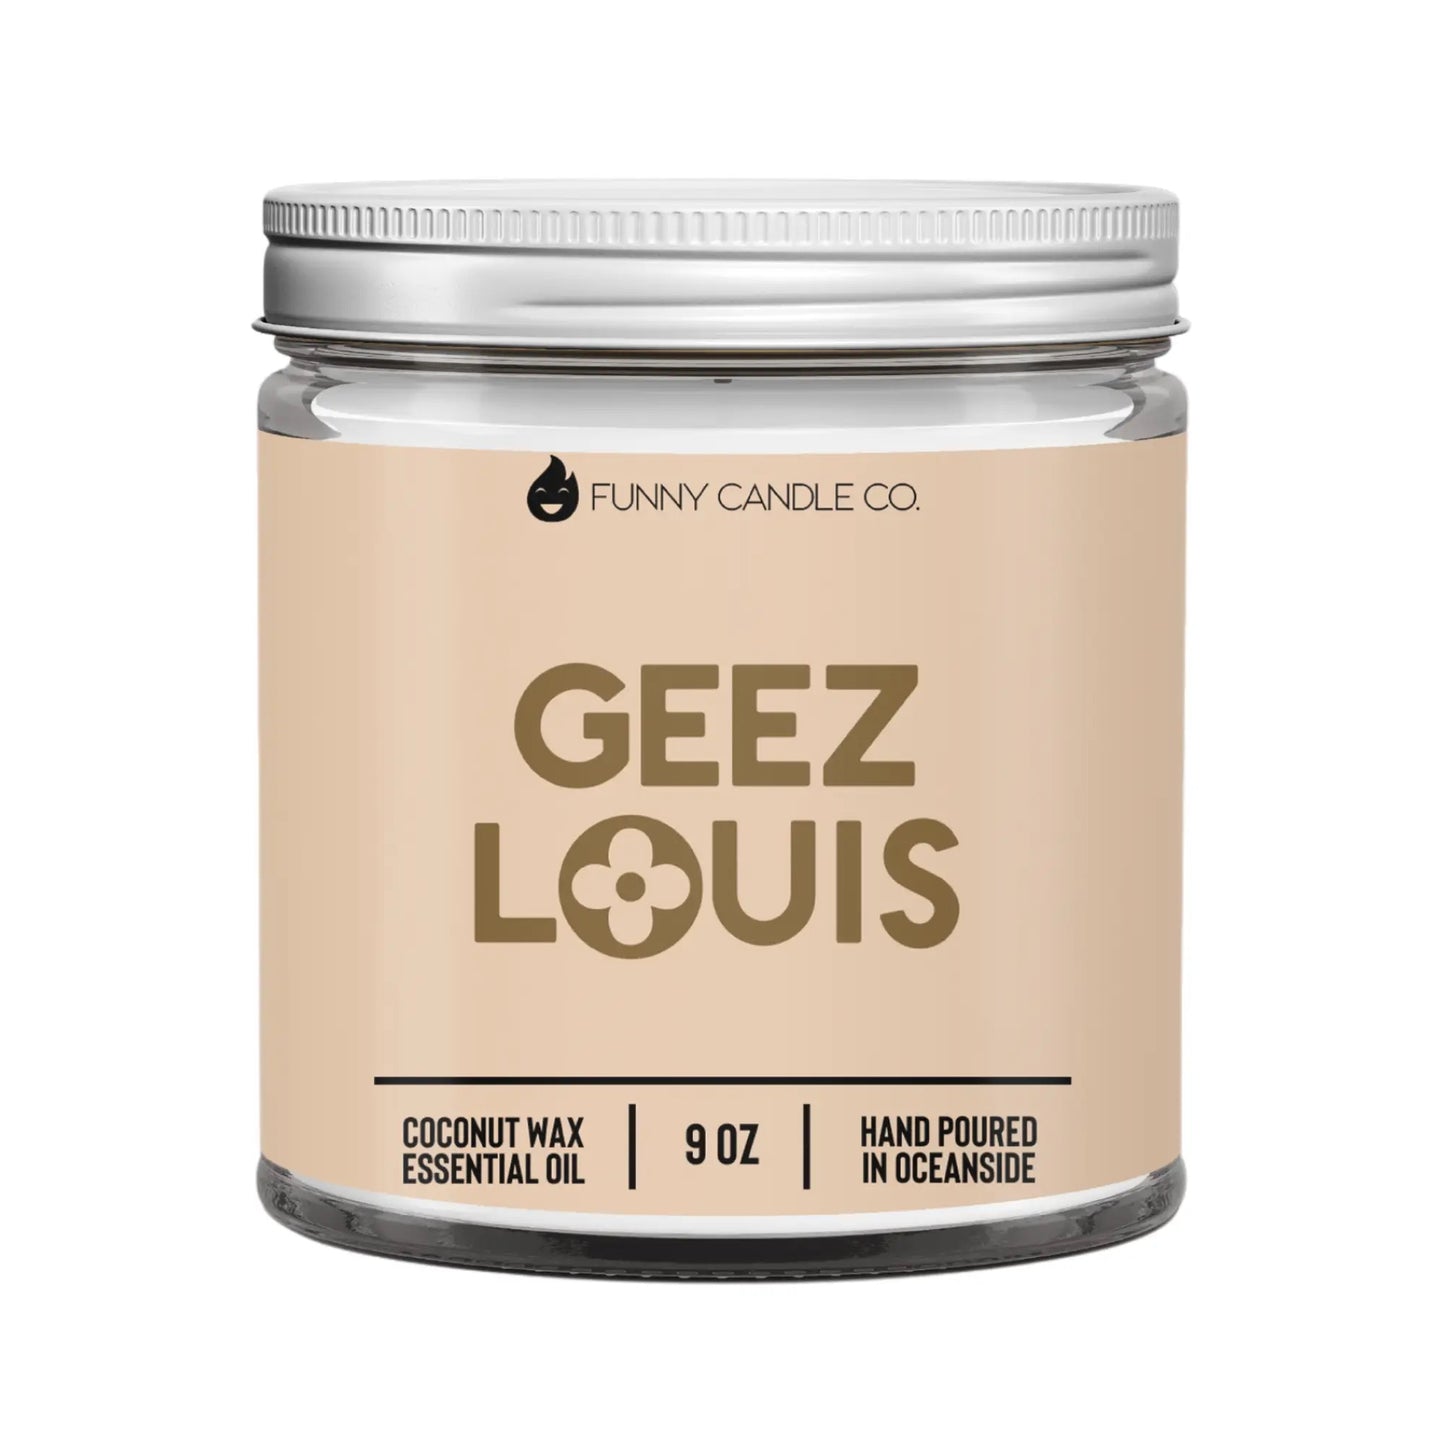 Funny Candle Co.- 
Geez Louis Candle